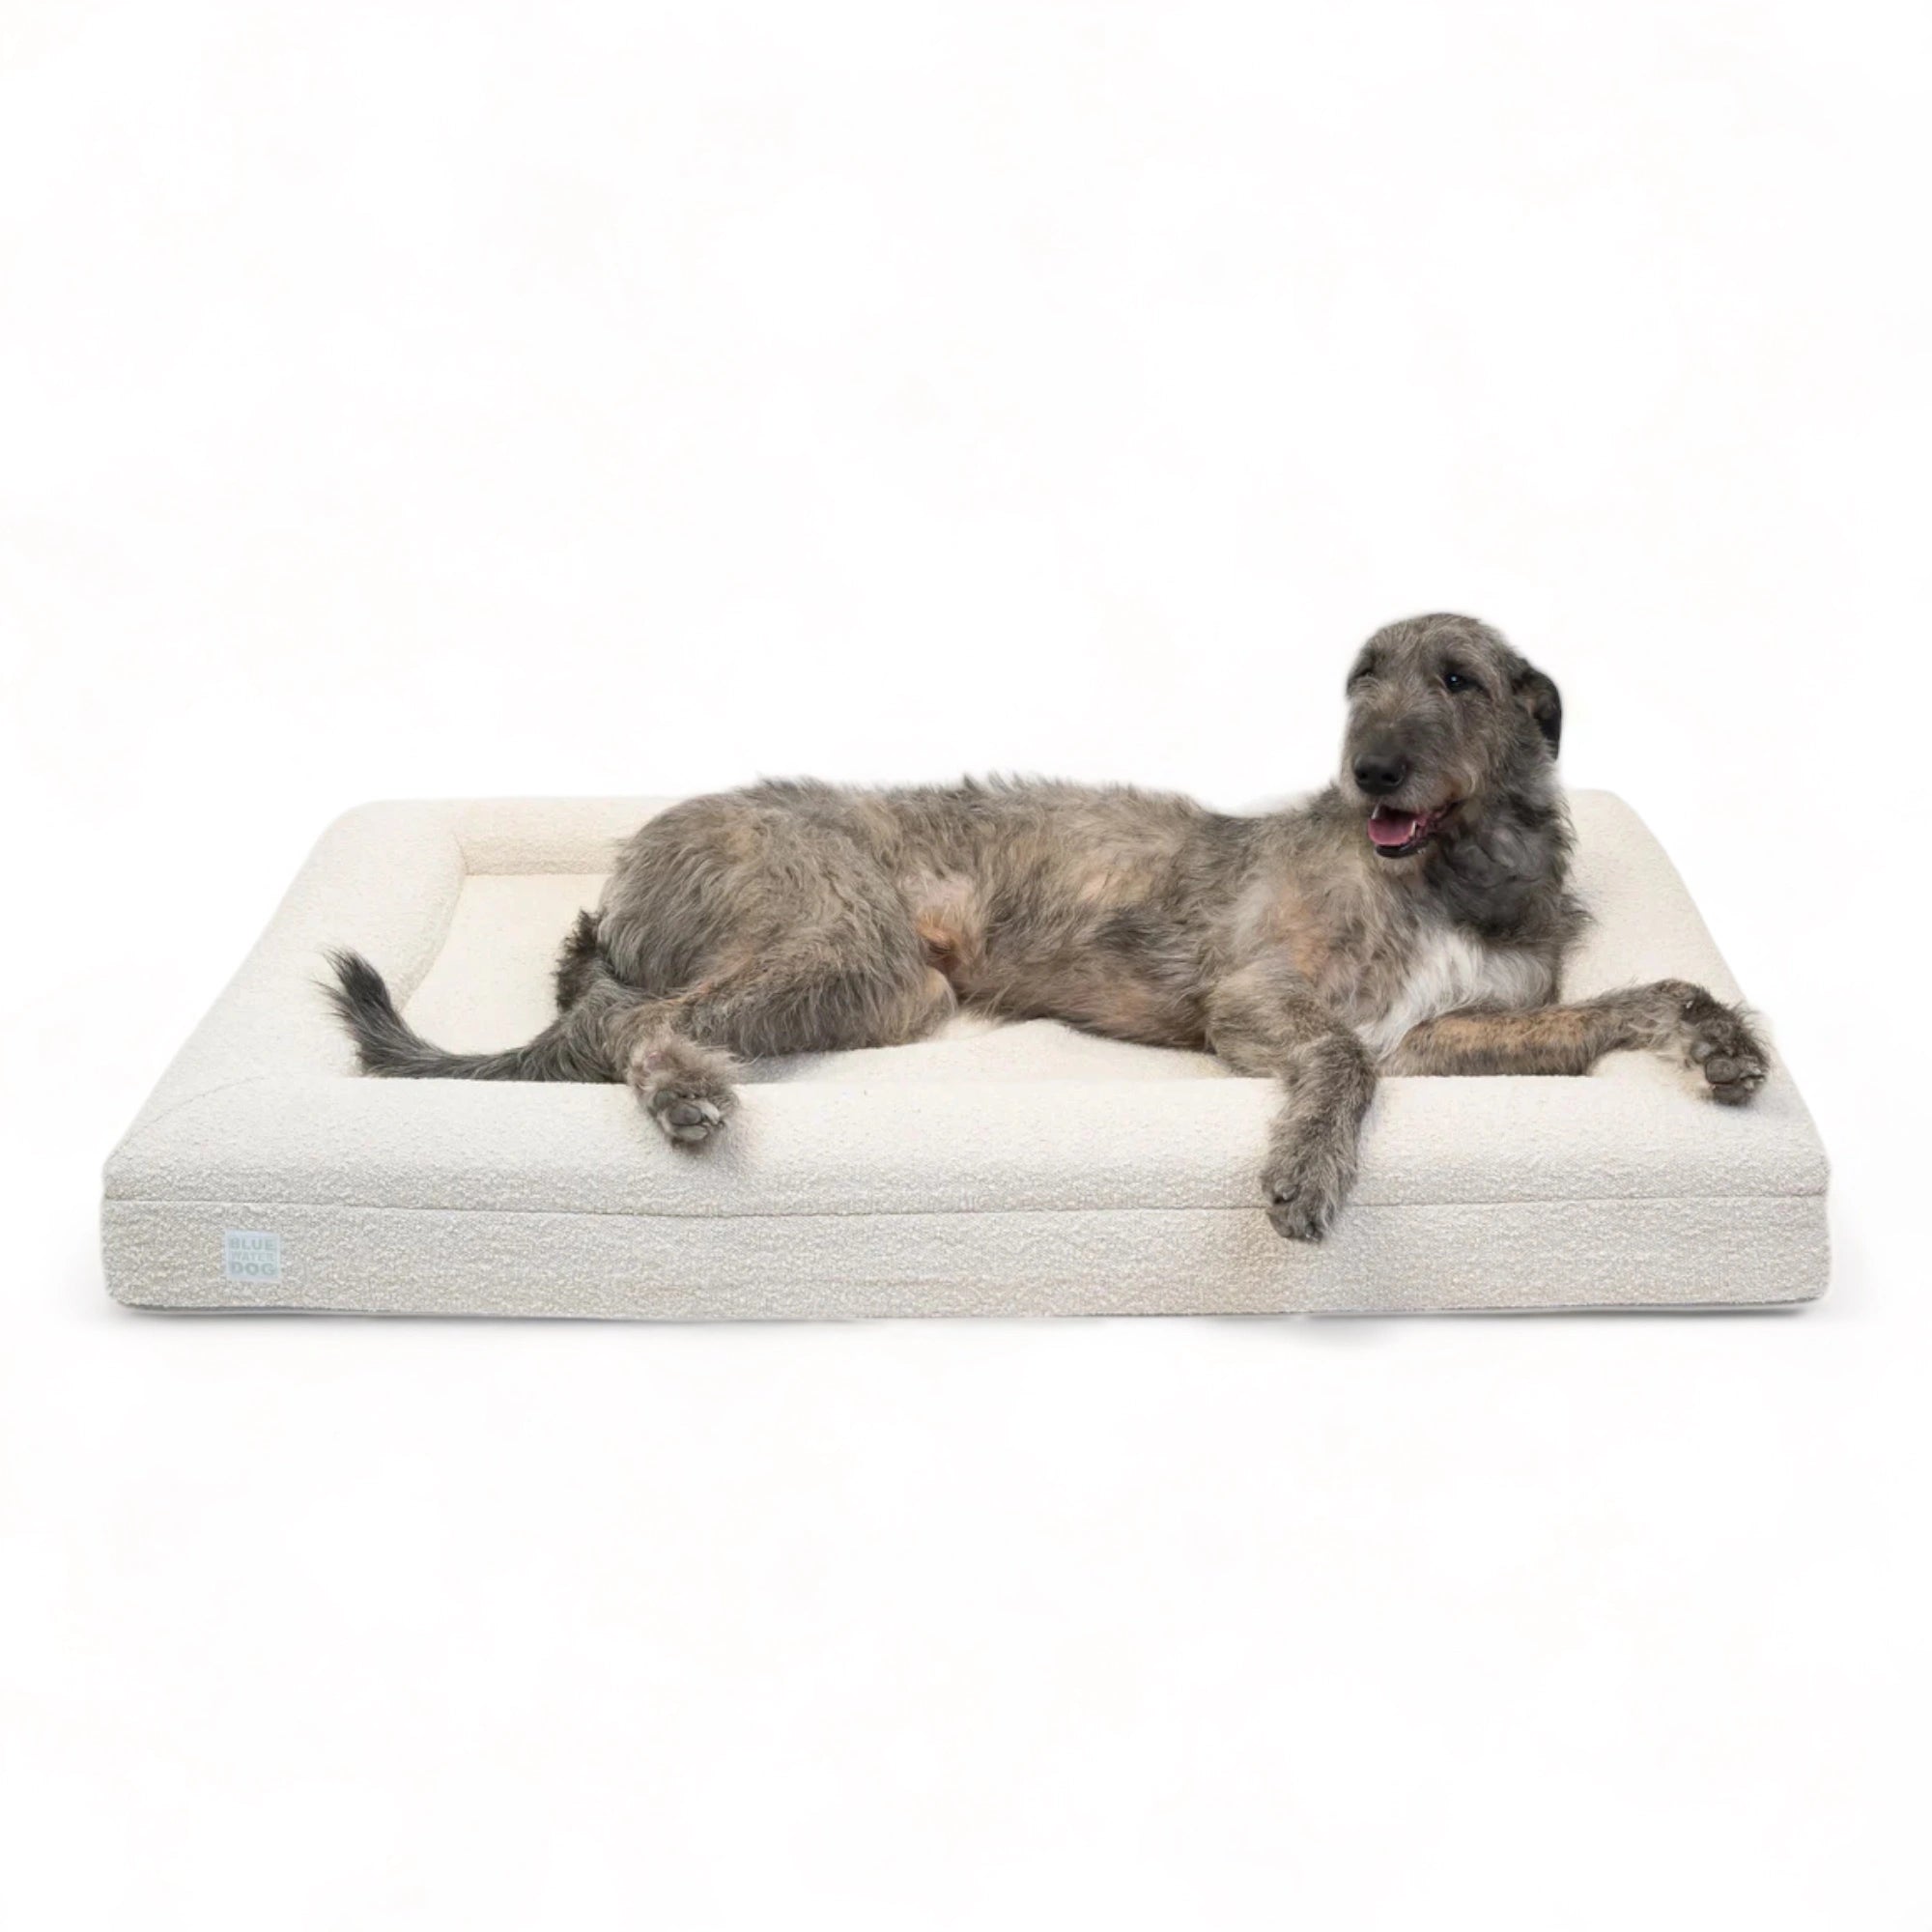 Irish Wolfhound laying on an extra large, cloud-colored orthopedic memory foam boucle dog bed.